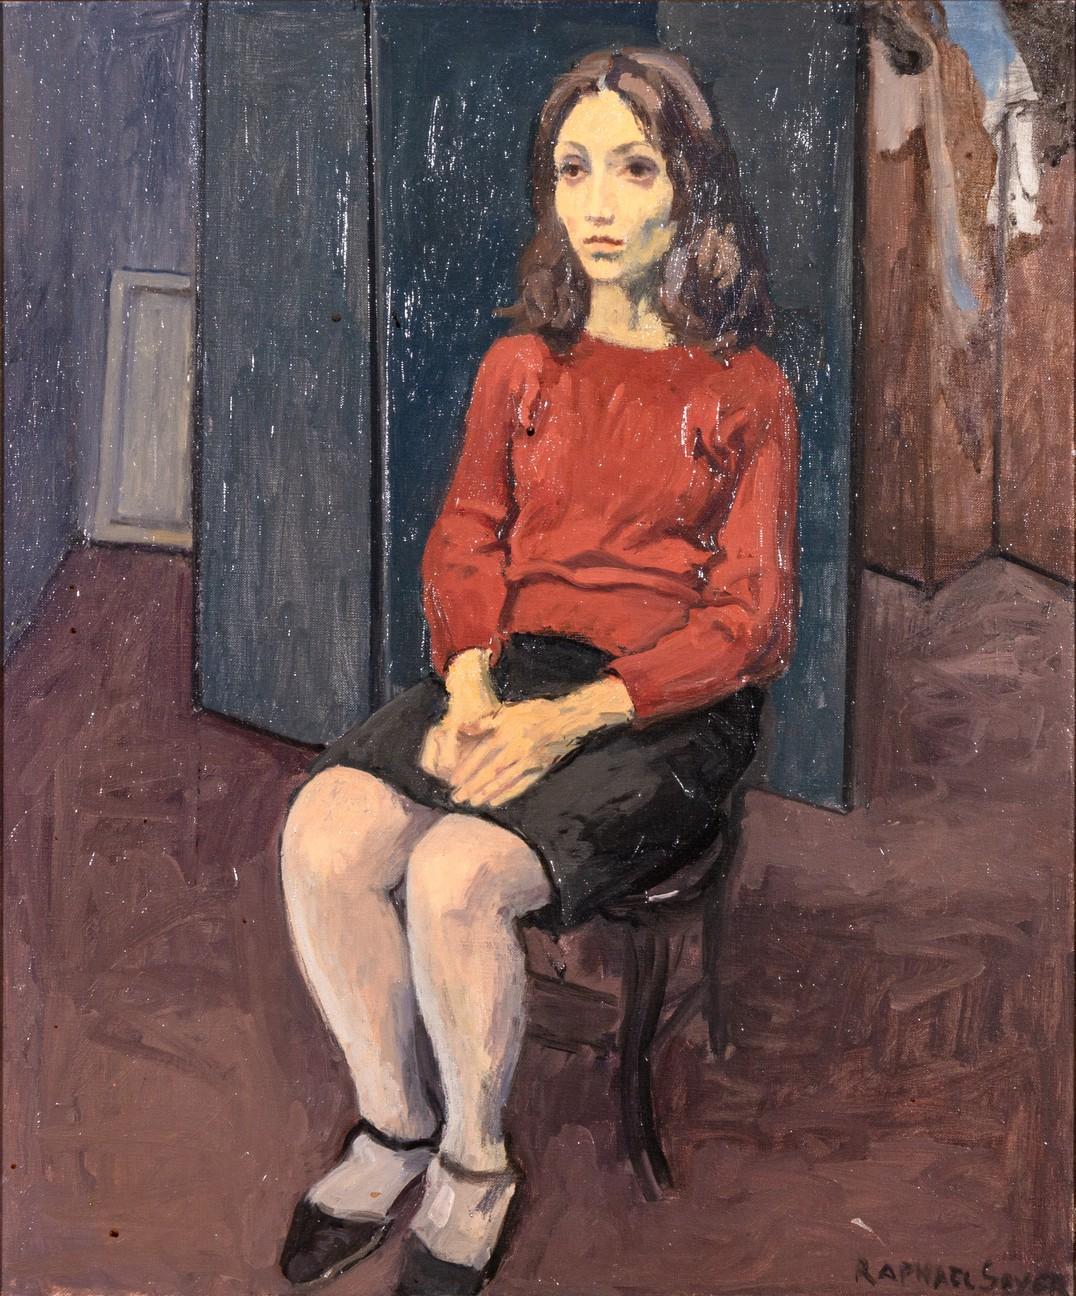 An original pensive oil painting on canvas titled “Seated Girl” by American artist Raphael Soyer. Hand signed bottom right. Circa 1950s. The painting depicts a young woman in red dressed in mid-20th century attire that was fashionable in the era.